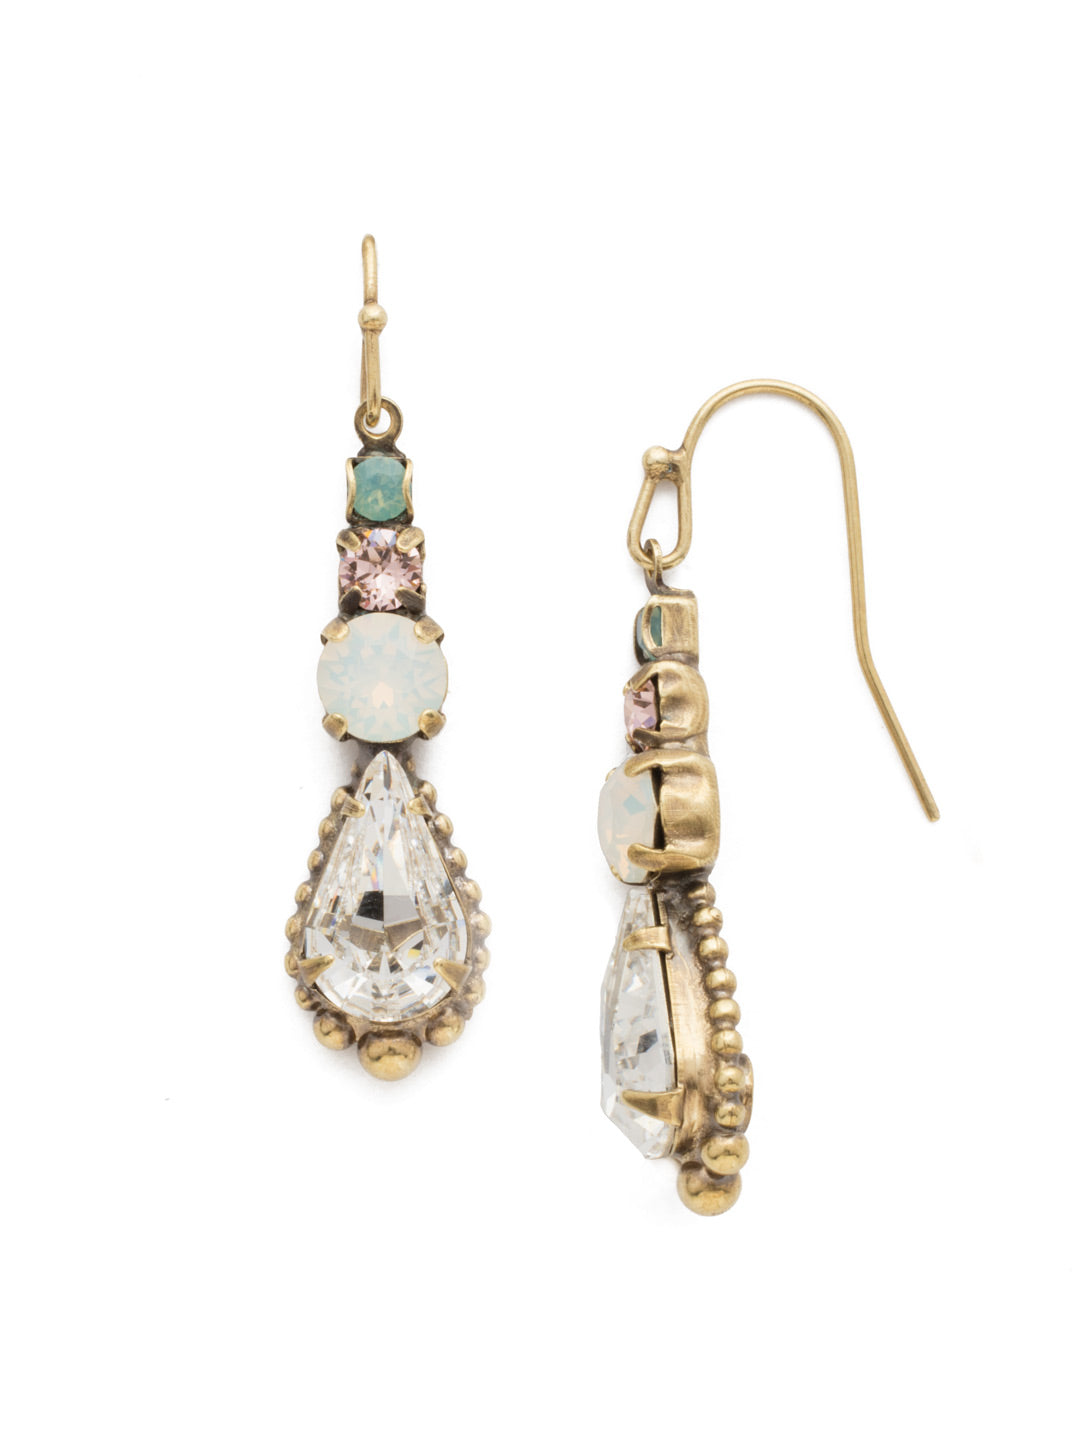 Lotus Earrings - EDU13AGWMA - <p>Various sizes of round crystals dangling to a pear crystal secured by a hook post. From Sorrelli's White Magnolia collection in our Antique Gold-tone finish.</p>